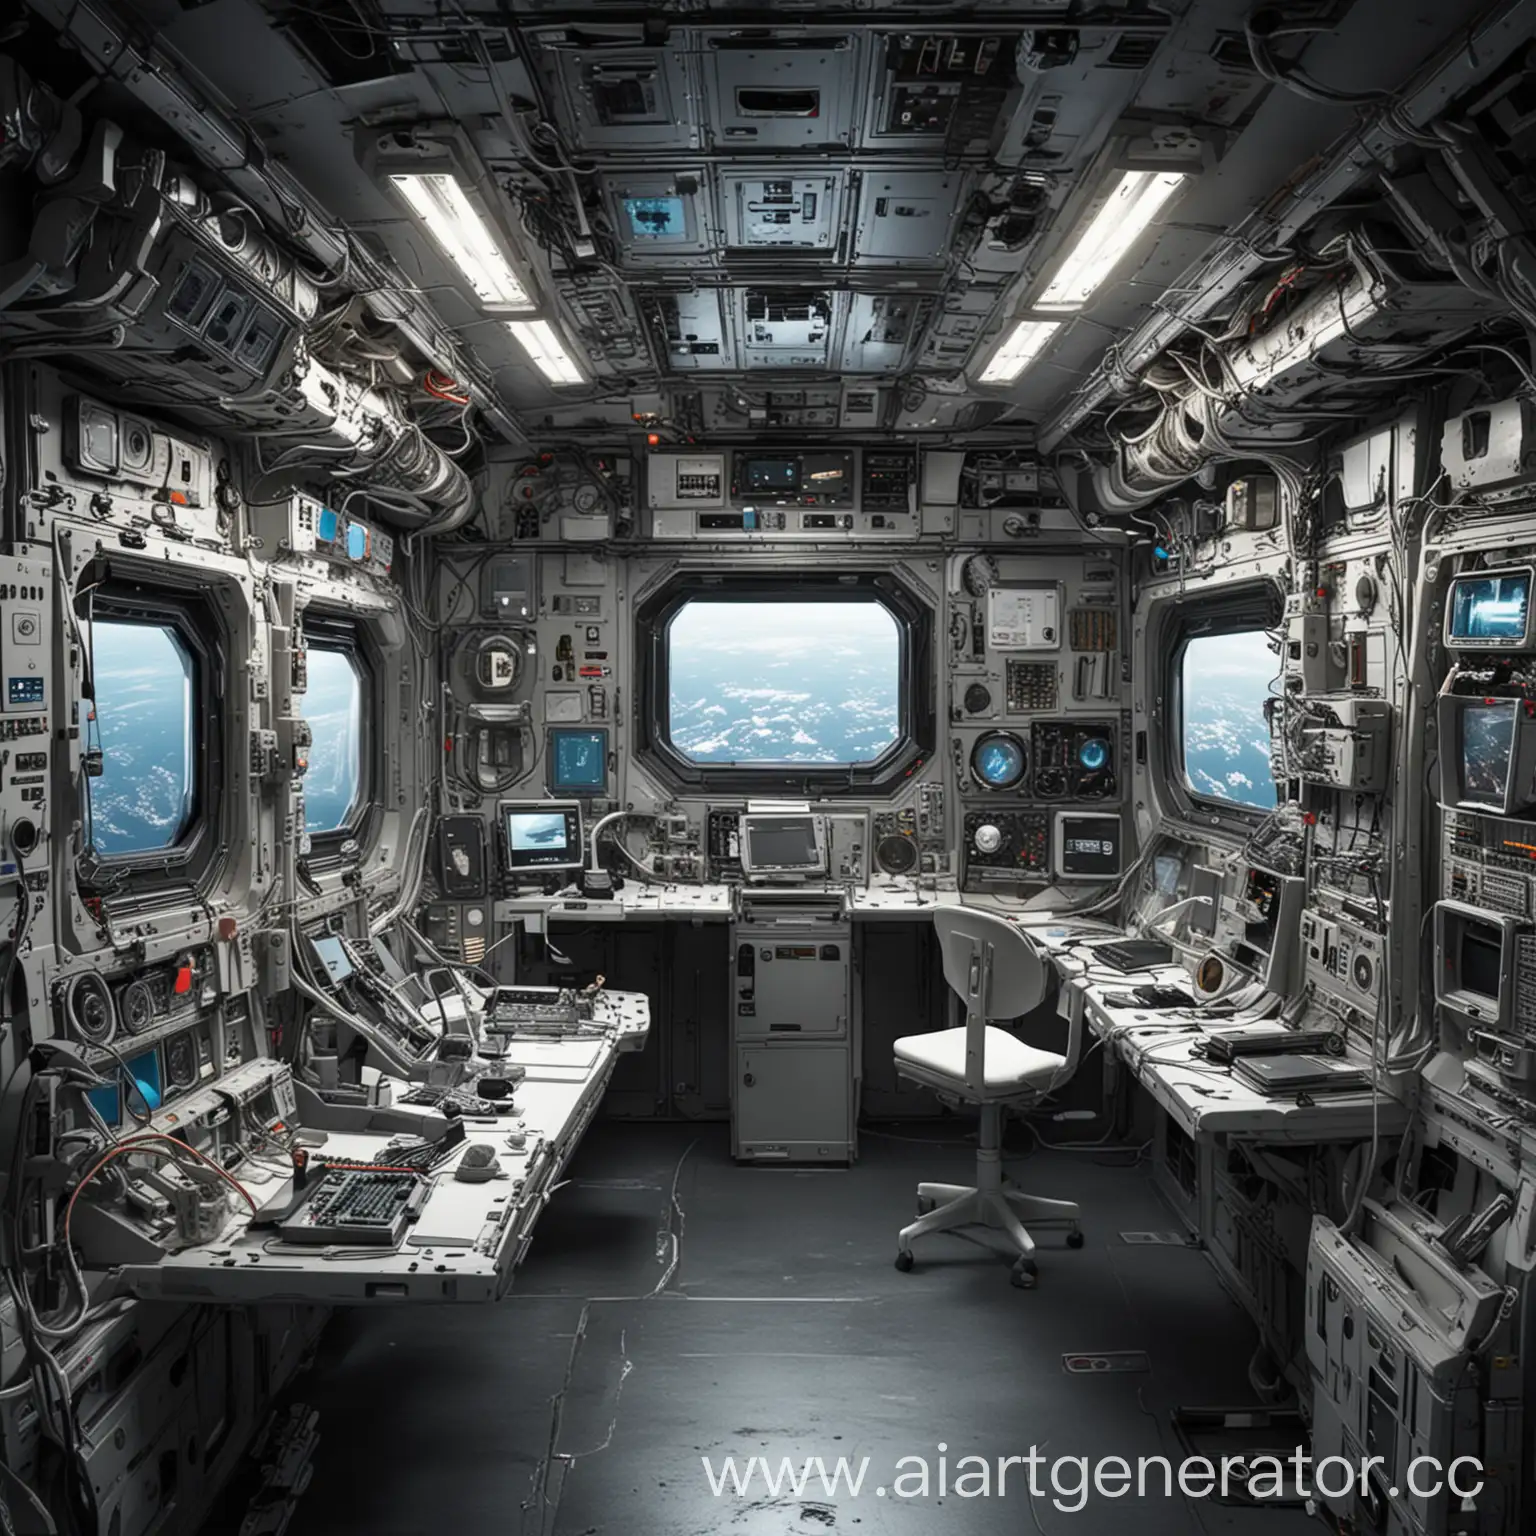 Futuristic-Space-Station-Compartment-of-Communications